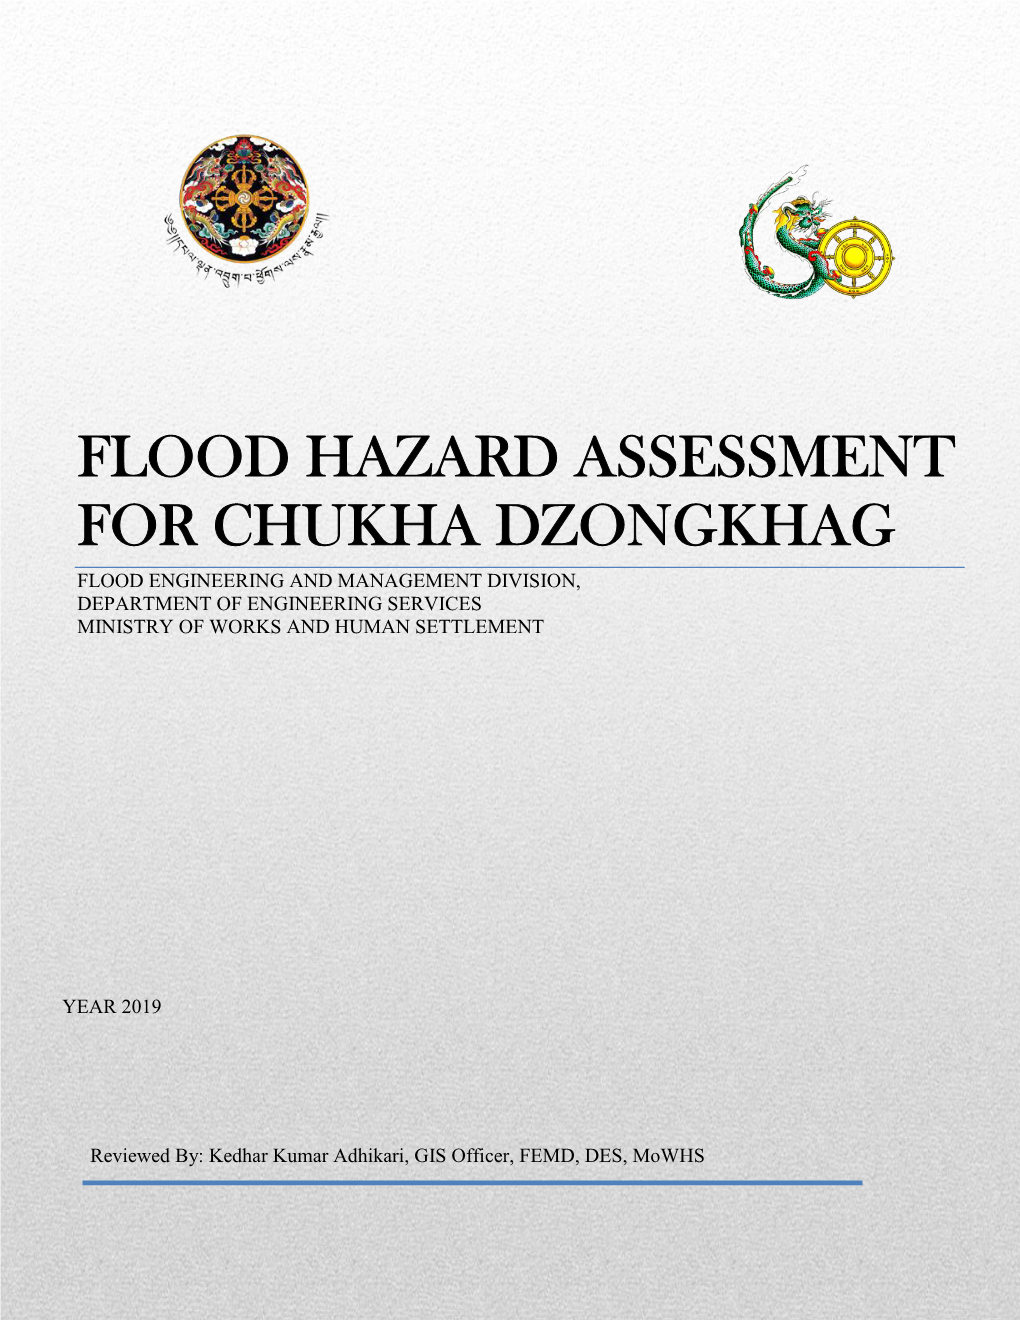 Flood Hazard Assessment for Chukha Dzongkhag Flood Engineering and Management Division, Department of Engineering Services Ministry of Works and Human Settlement